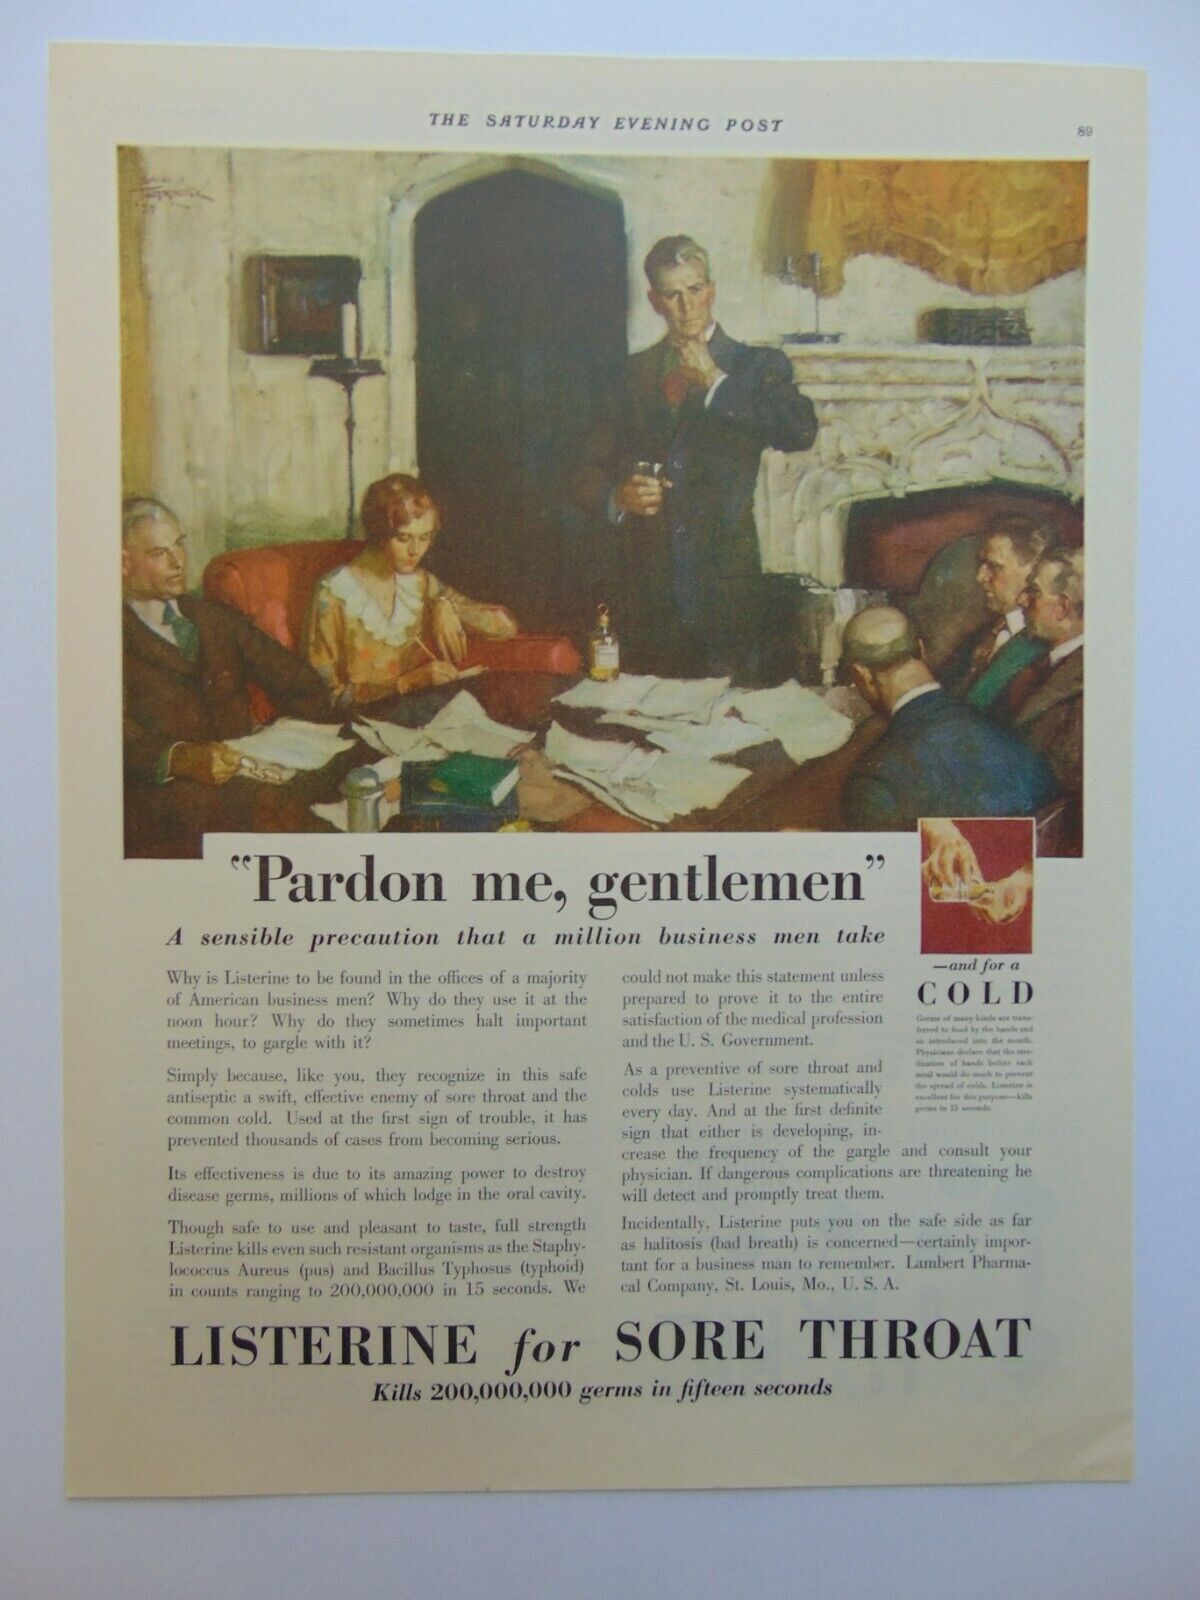 1930 LISTERINE For SORE THROAT Kills 200 Million Germs in 15 Seconds print ad